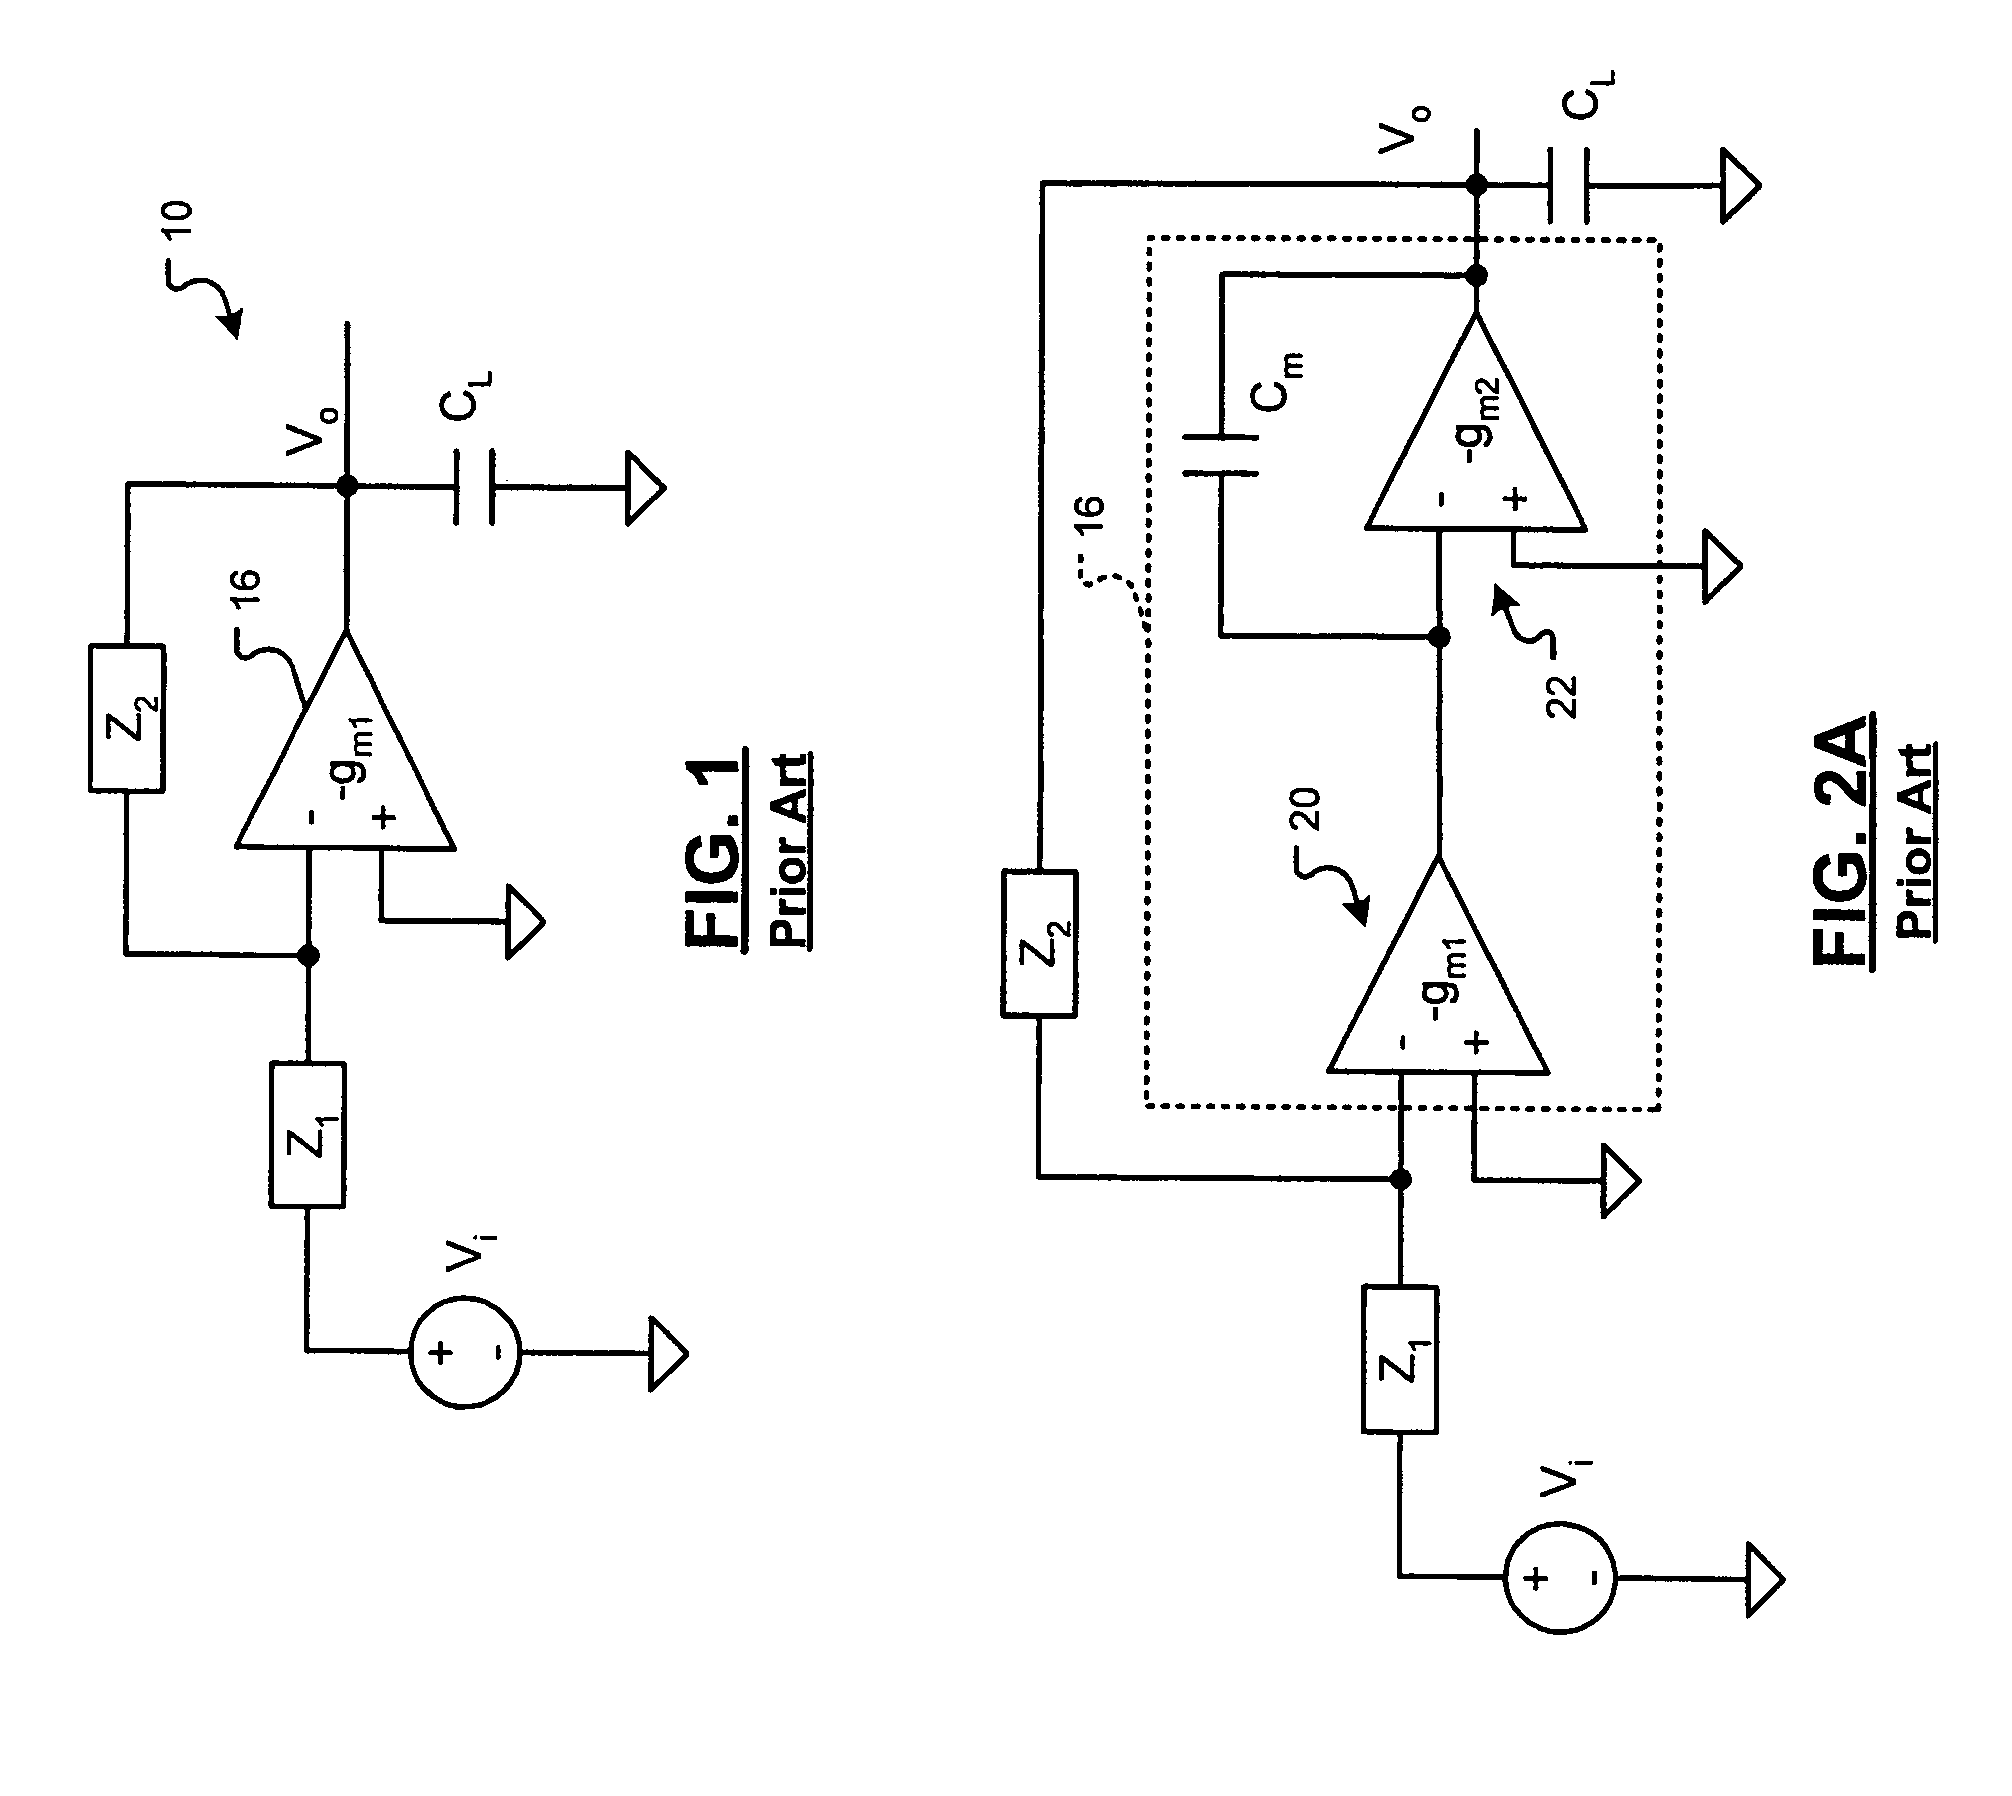 Compensation circuit for amplifiers having multiple stages